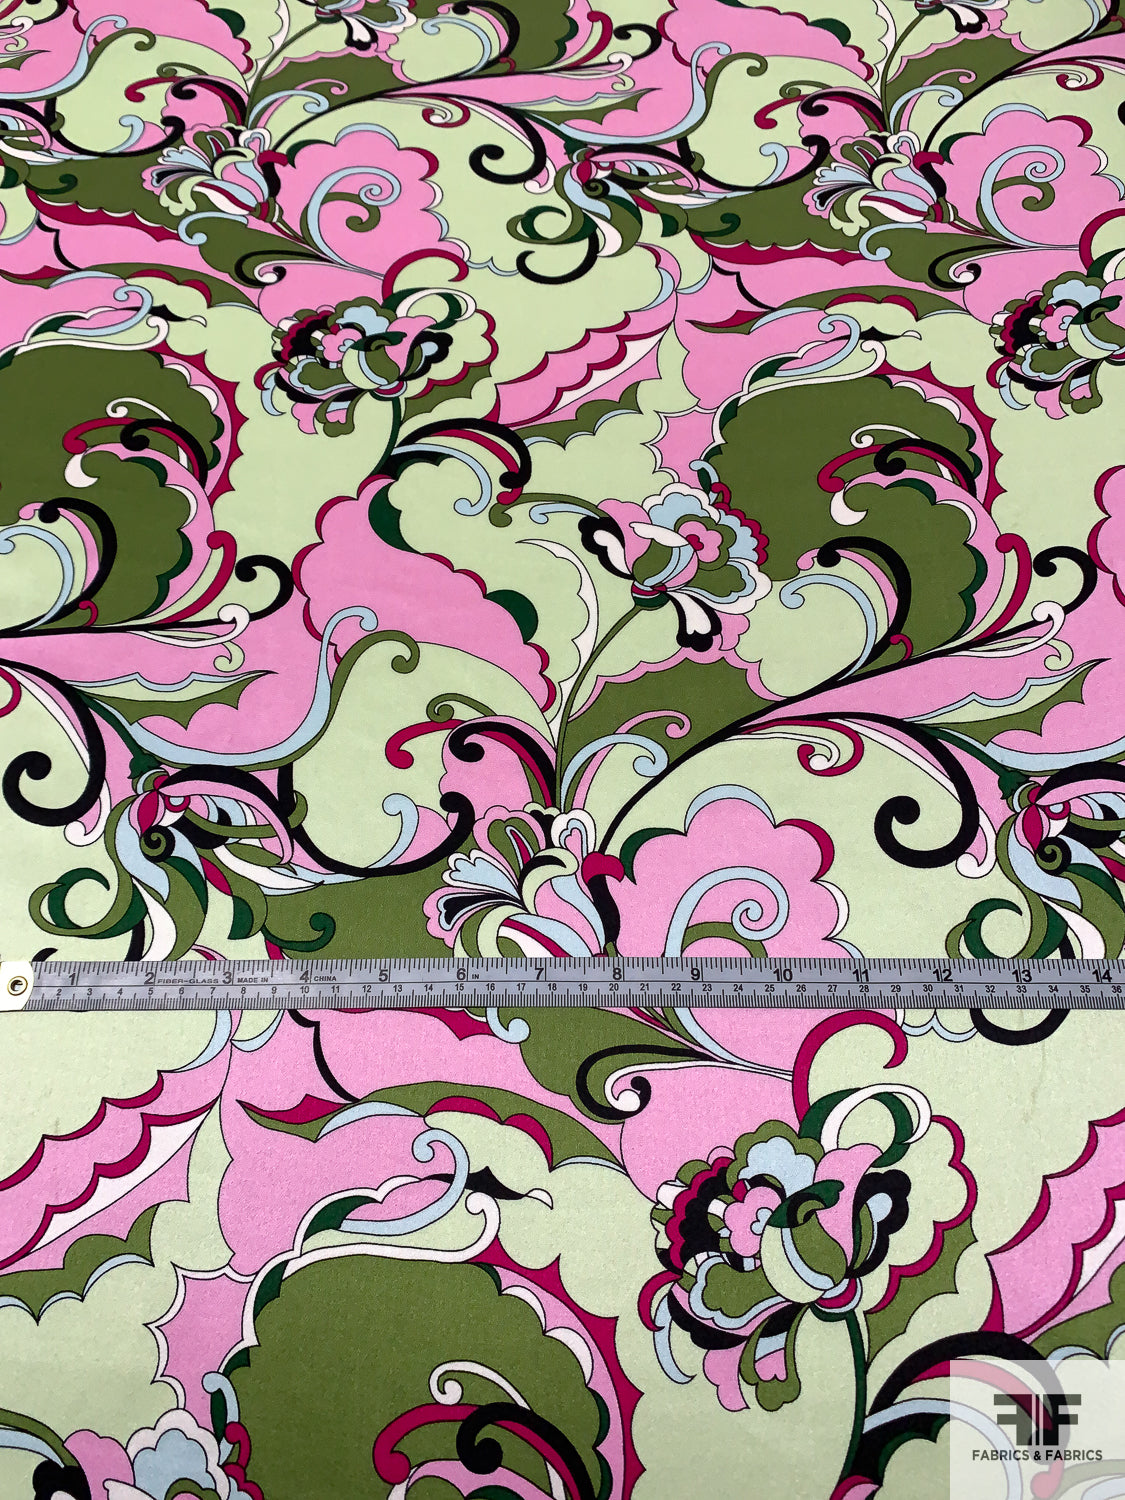 NEW! 100% Silk Chiffon Pucci Inspired Fabric Pink Blue Floral By The Yard